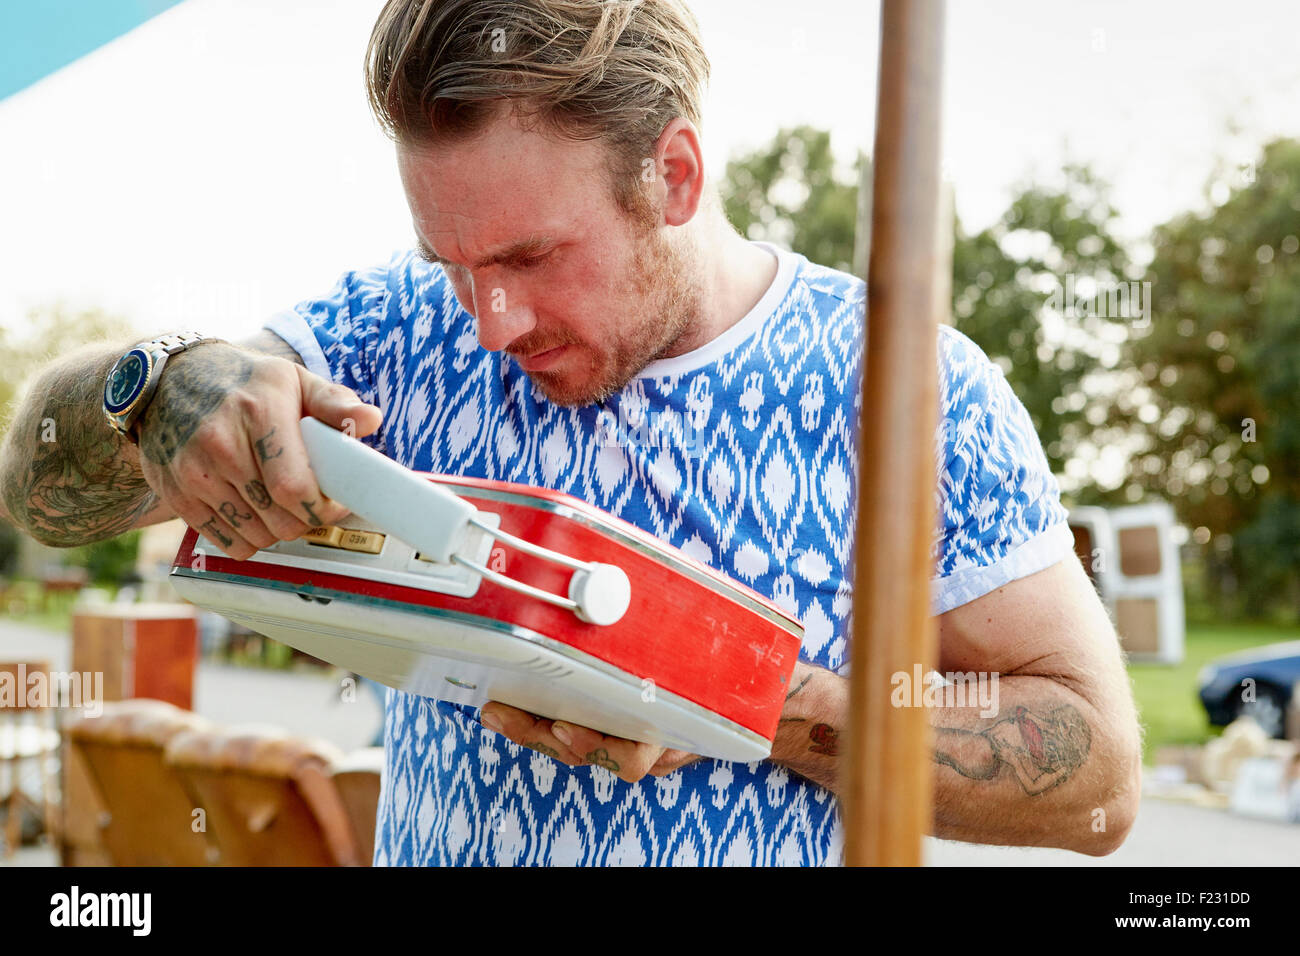 A man in a blue shirt with tattooed forearms, looking at a red vintage radio at a flea market. Stock Photo